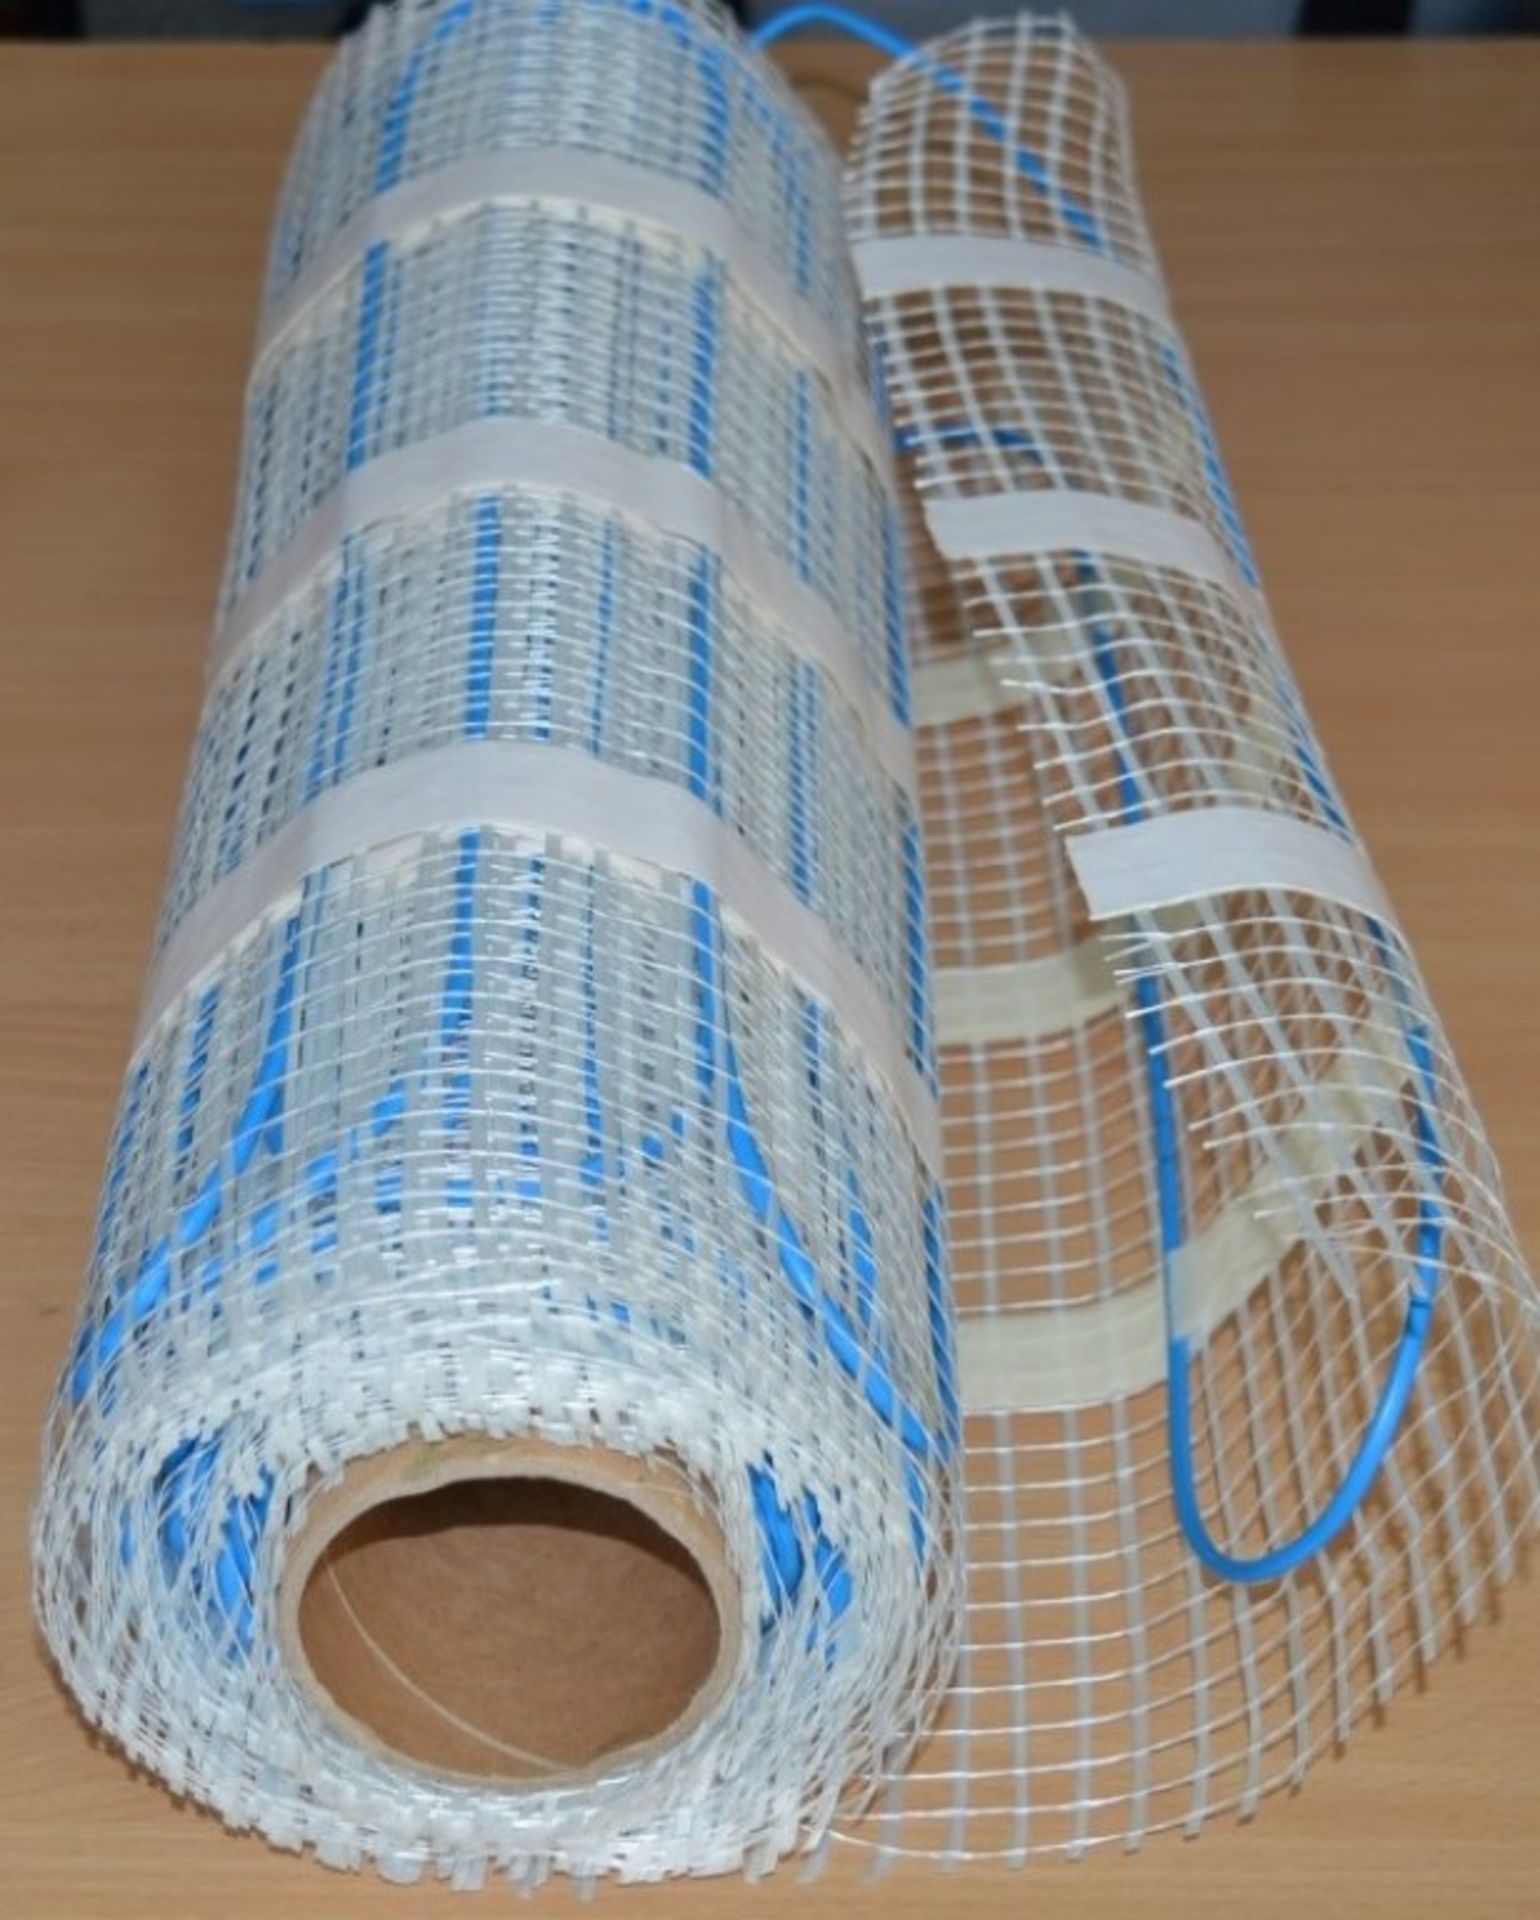 1 x Underfloor Heating System by MyFloorHeating - Covers 1.5 Square Meters - Includes 0.5 x 3m - Image 10 of 10